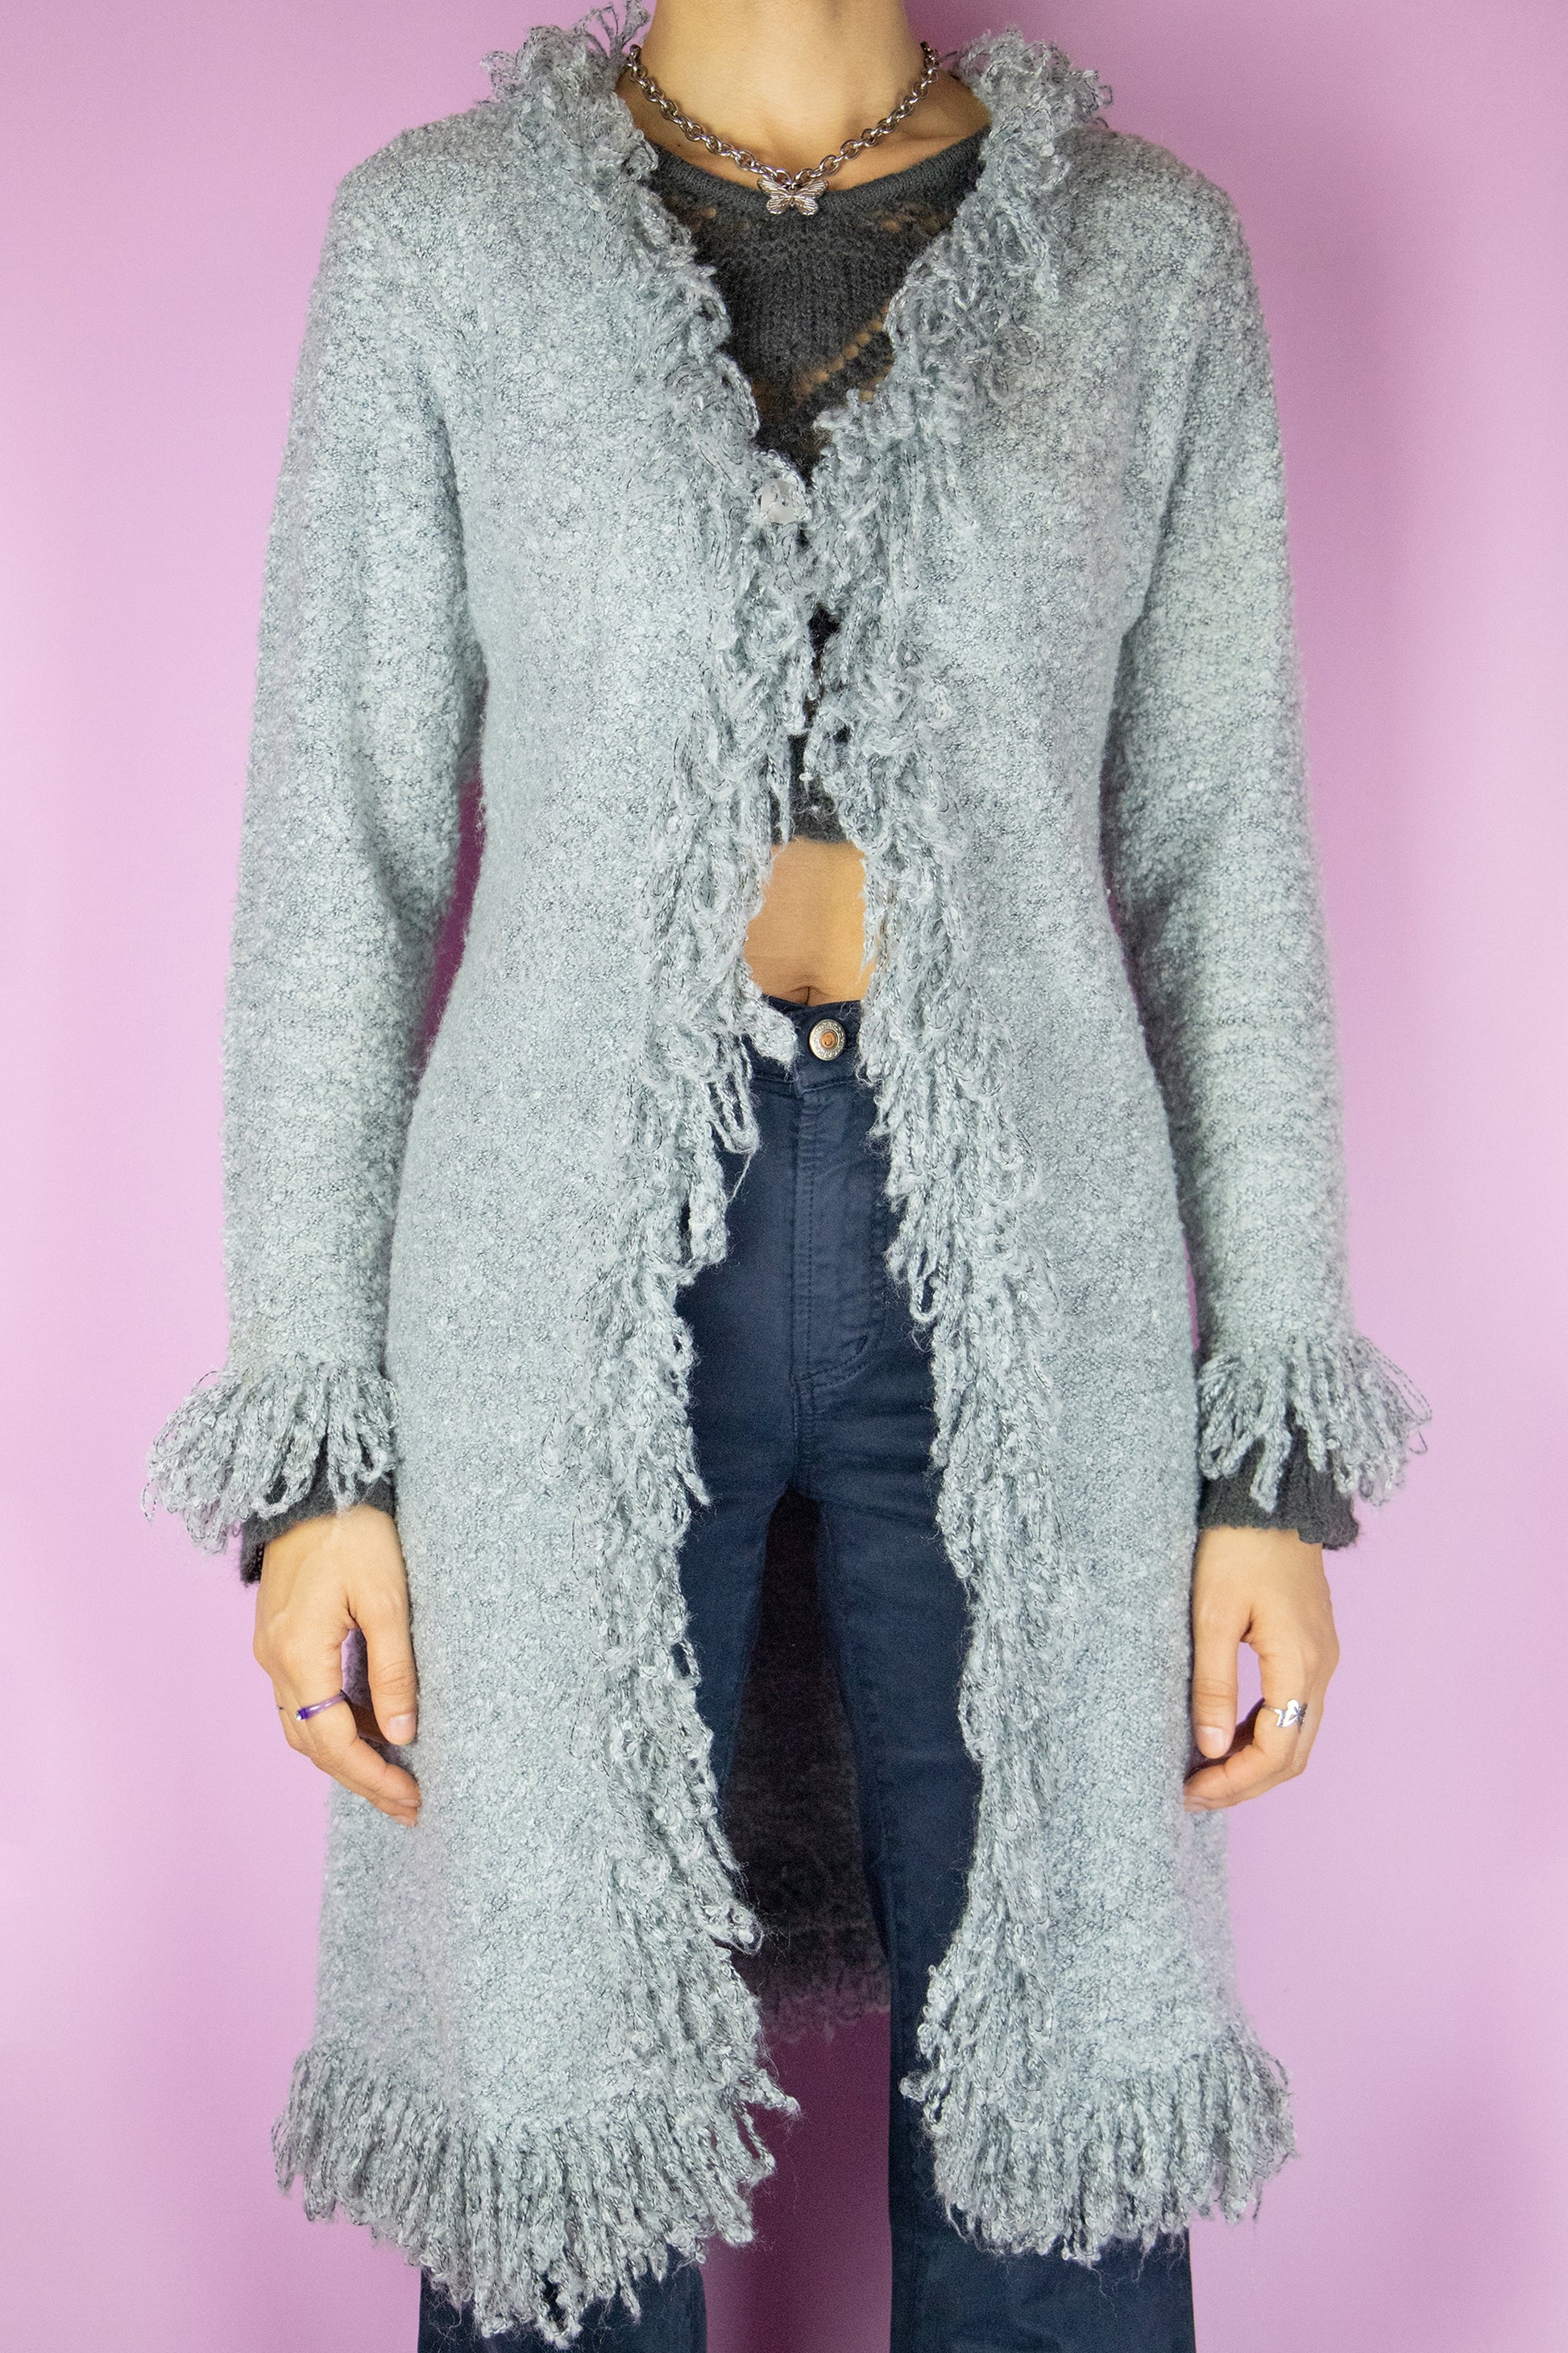 The Y2K Gray Penny Lane Cardigan is a vintage long shaggy knit cardigan with a one button closure and fringe trim at the neckline and cuffs. Cyber fairy grunge 2000s boho duster jacket.